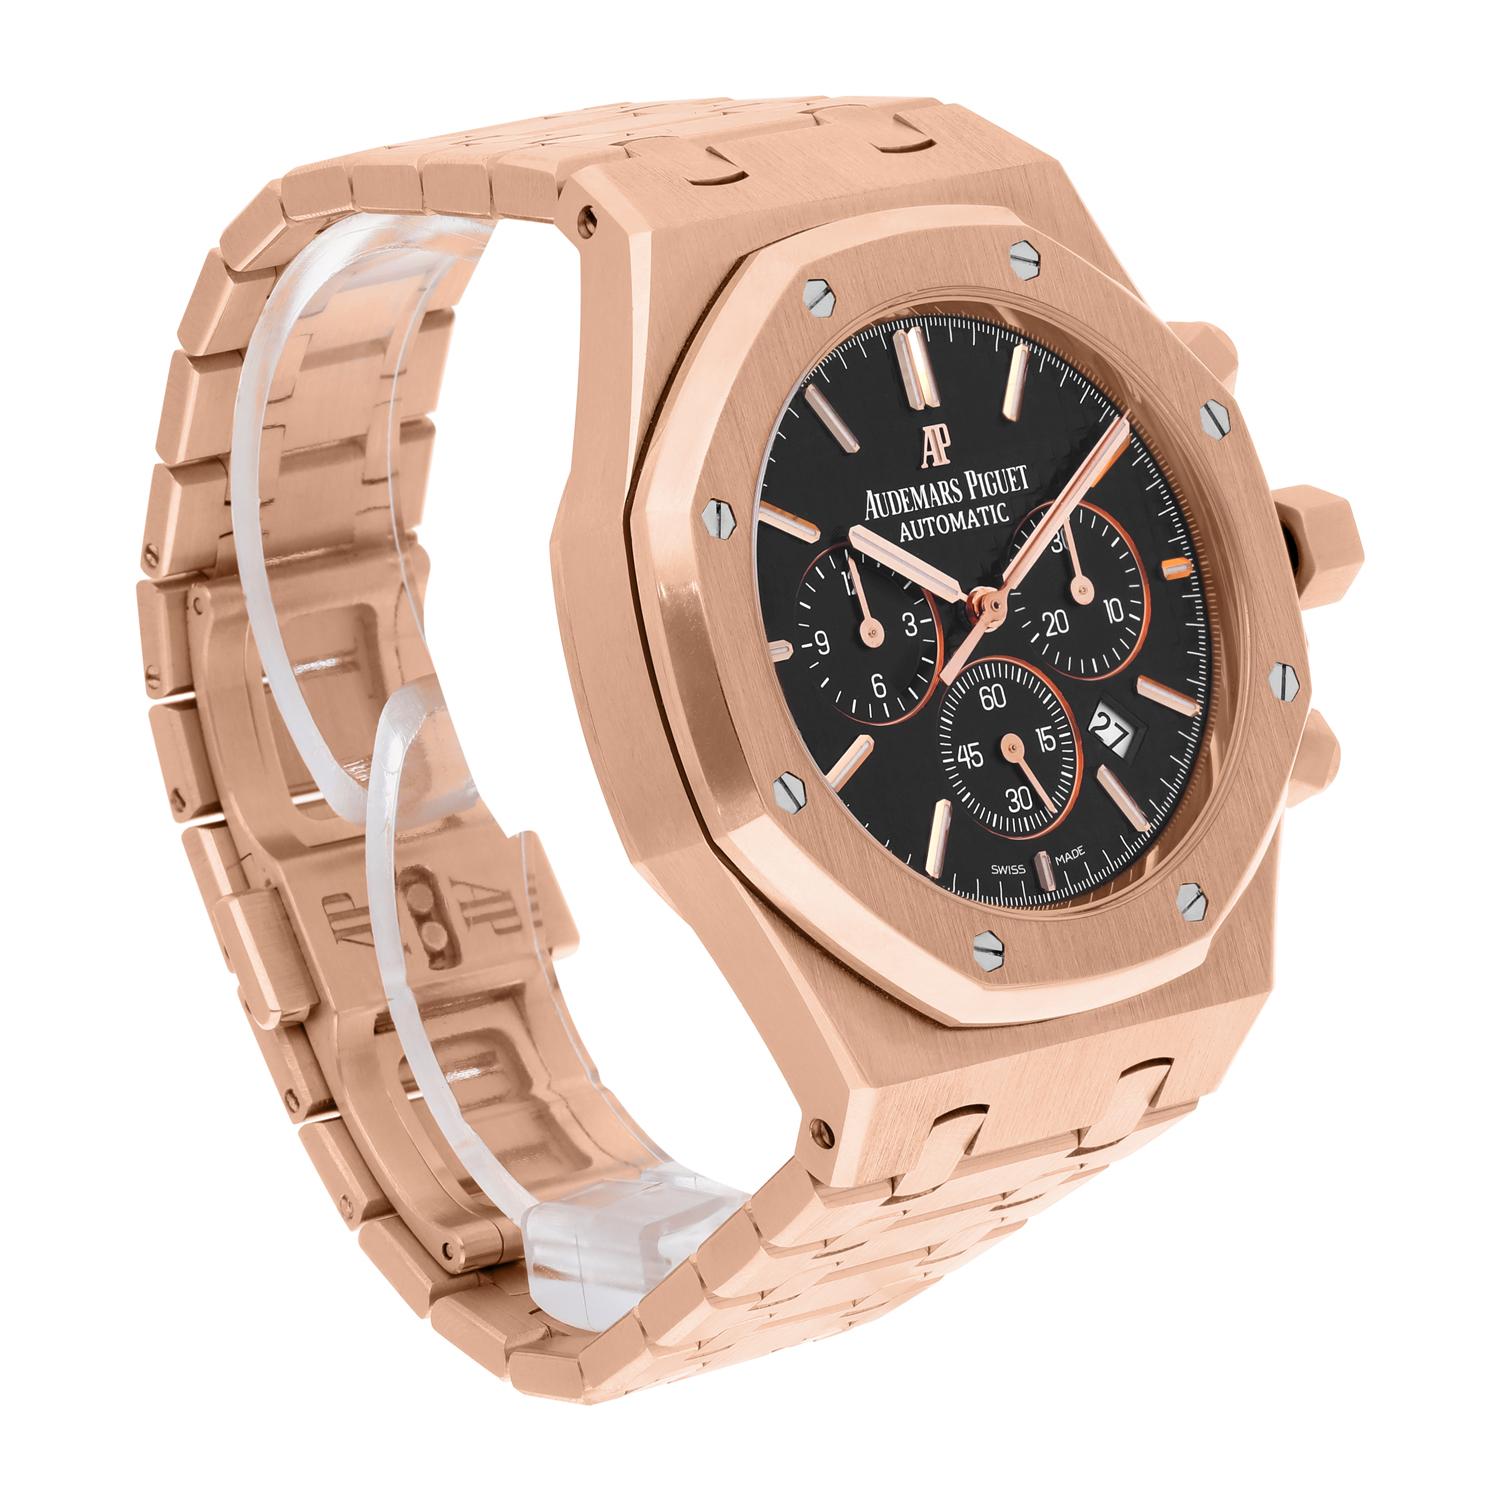 Audemars Piguet Royal Oak Chrono Rose Gold Black Mens Watch 26320OR.OO.1220OR.01 In Excellent Condition For Sale In New York, NY